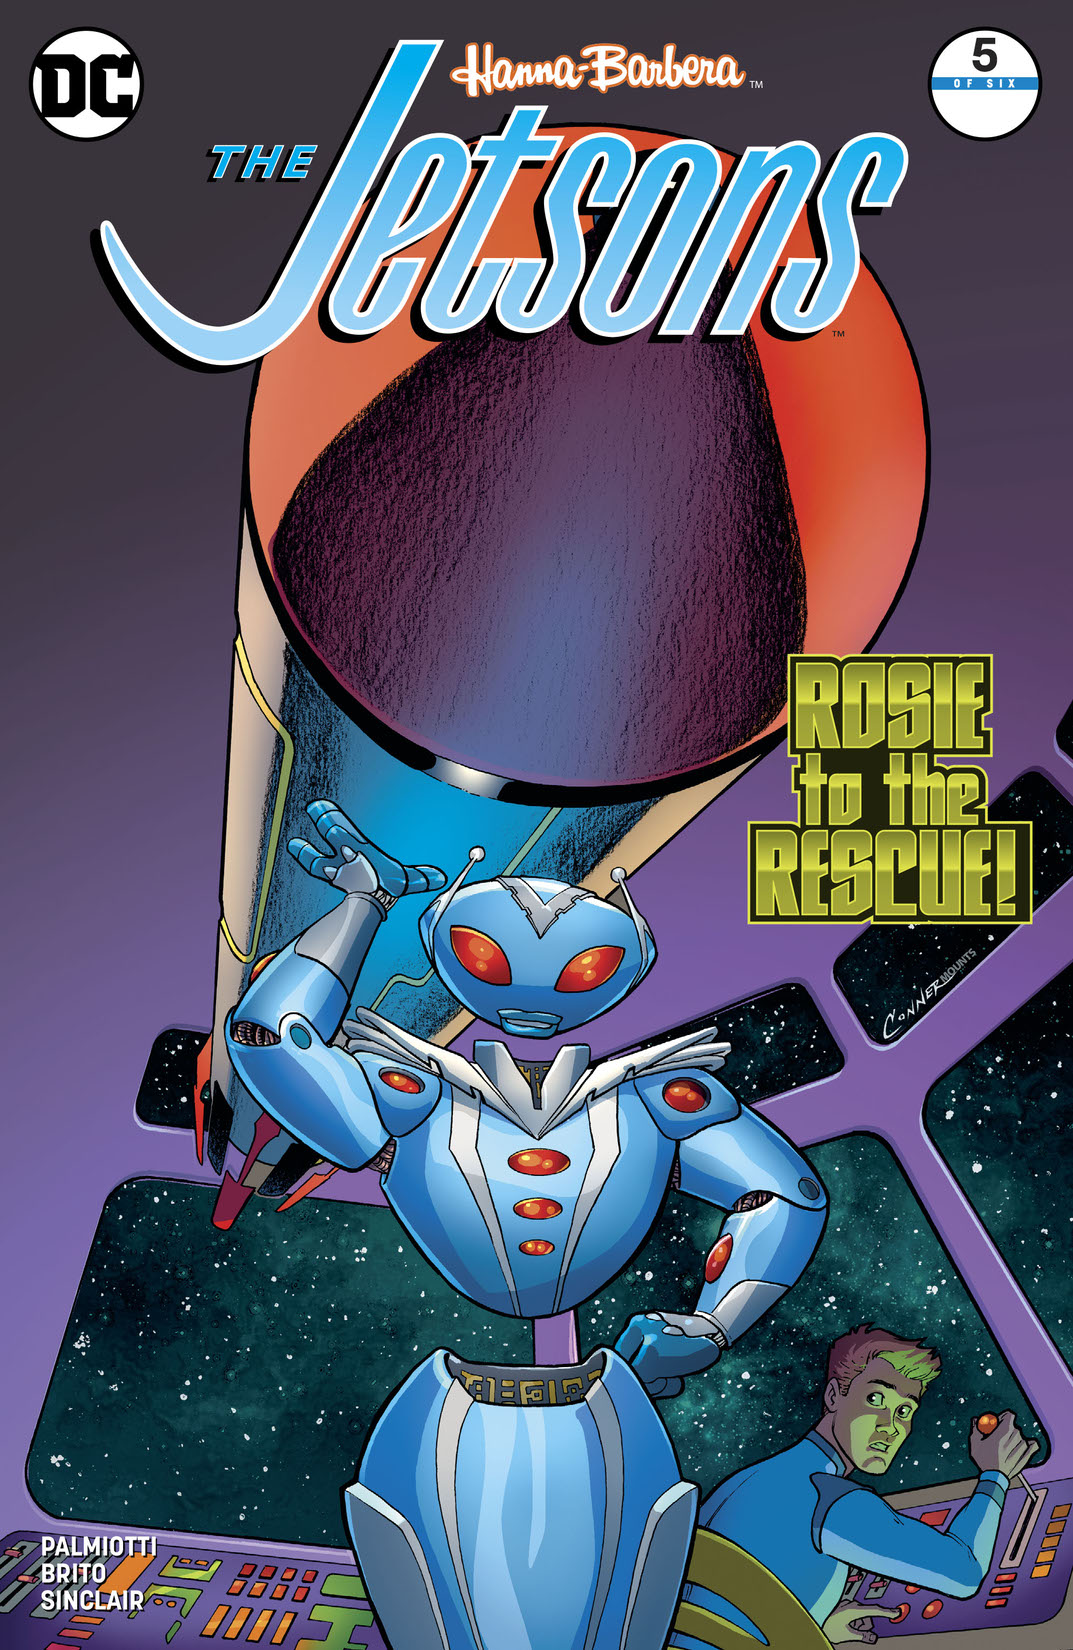 The Jetsons #5 preview images